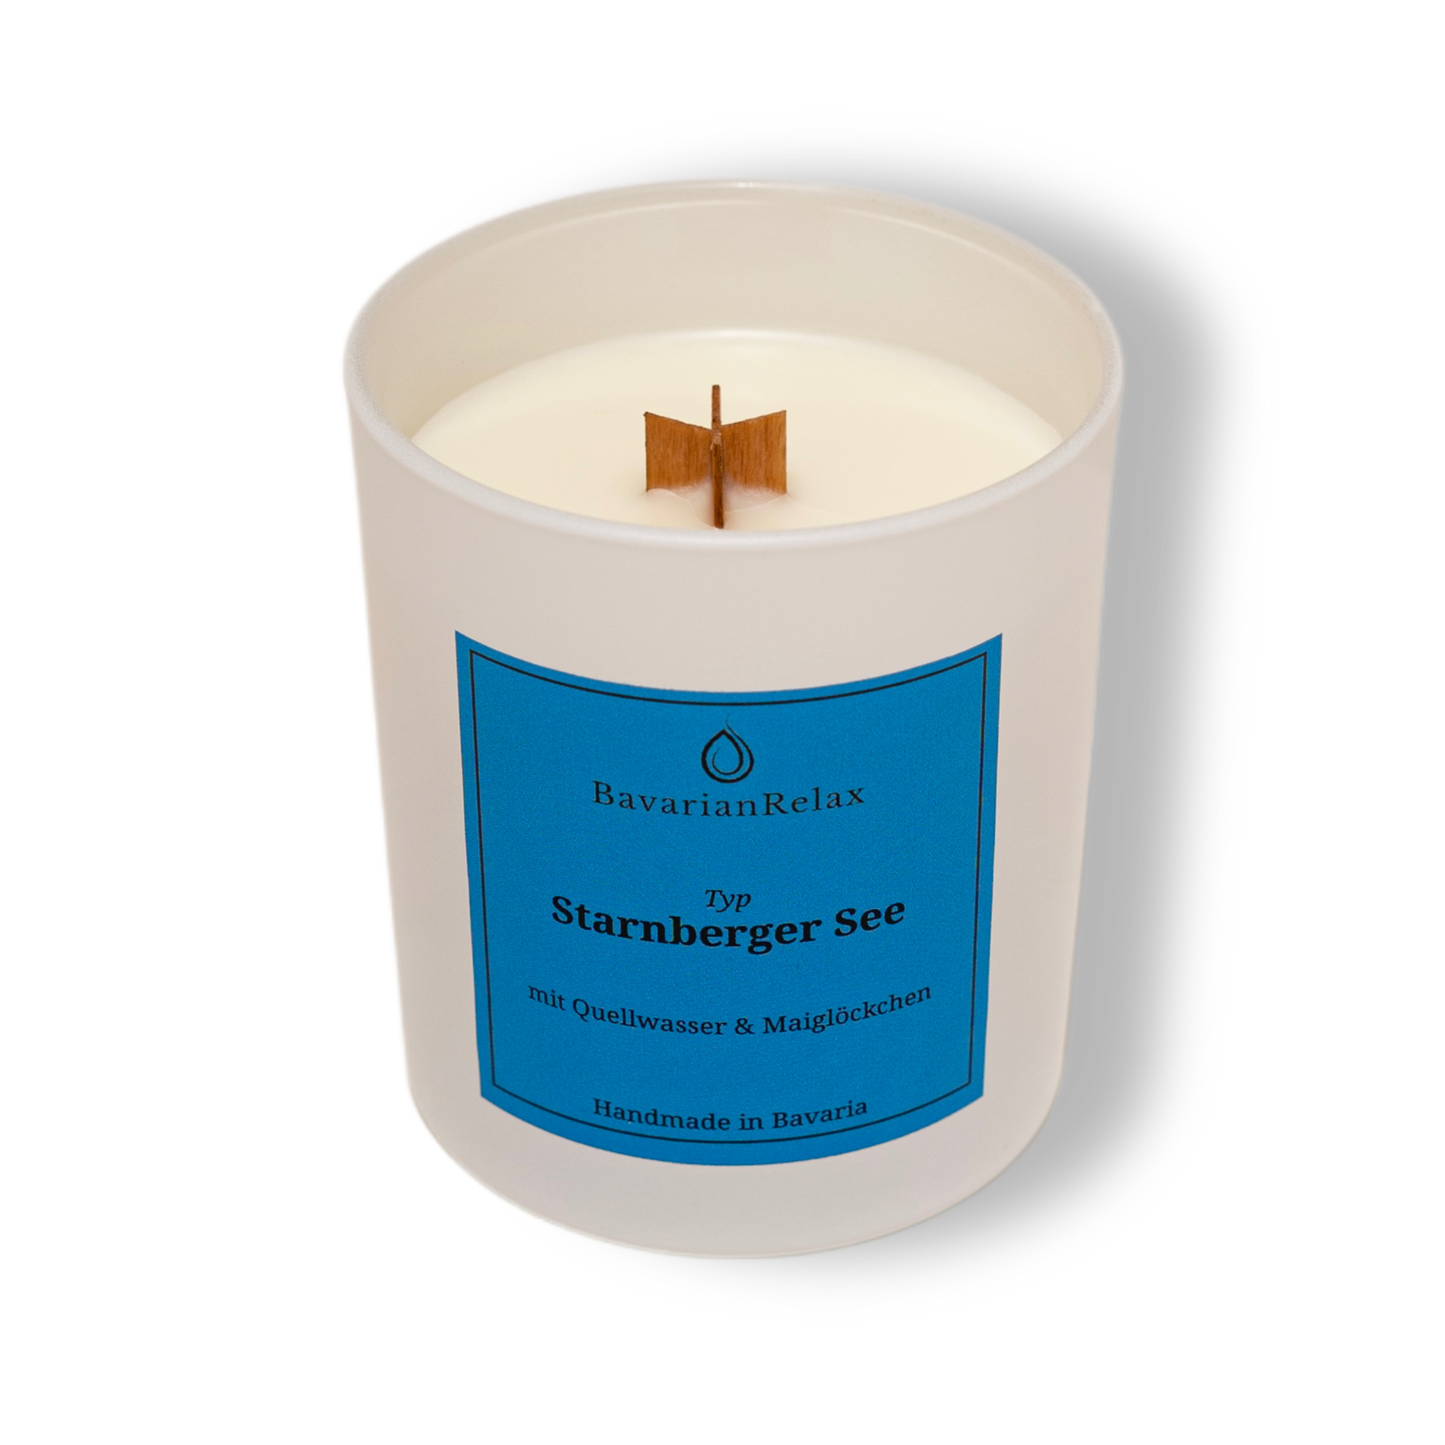 Type Starnberger See scented candle 200g - Handmade in Bavaria